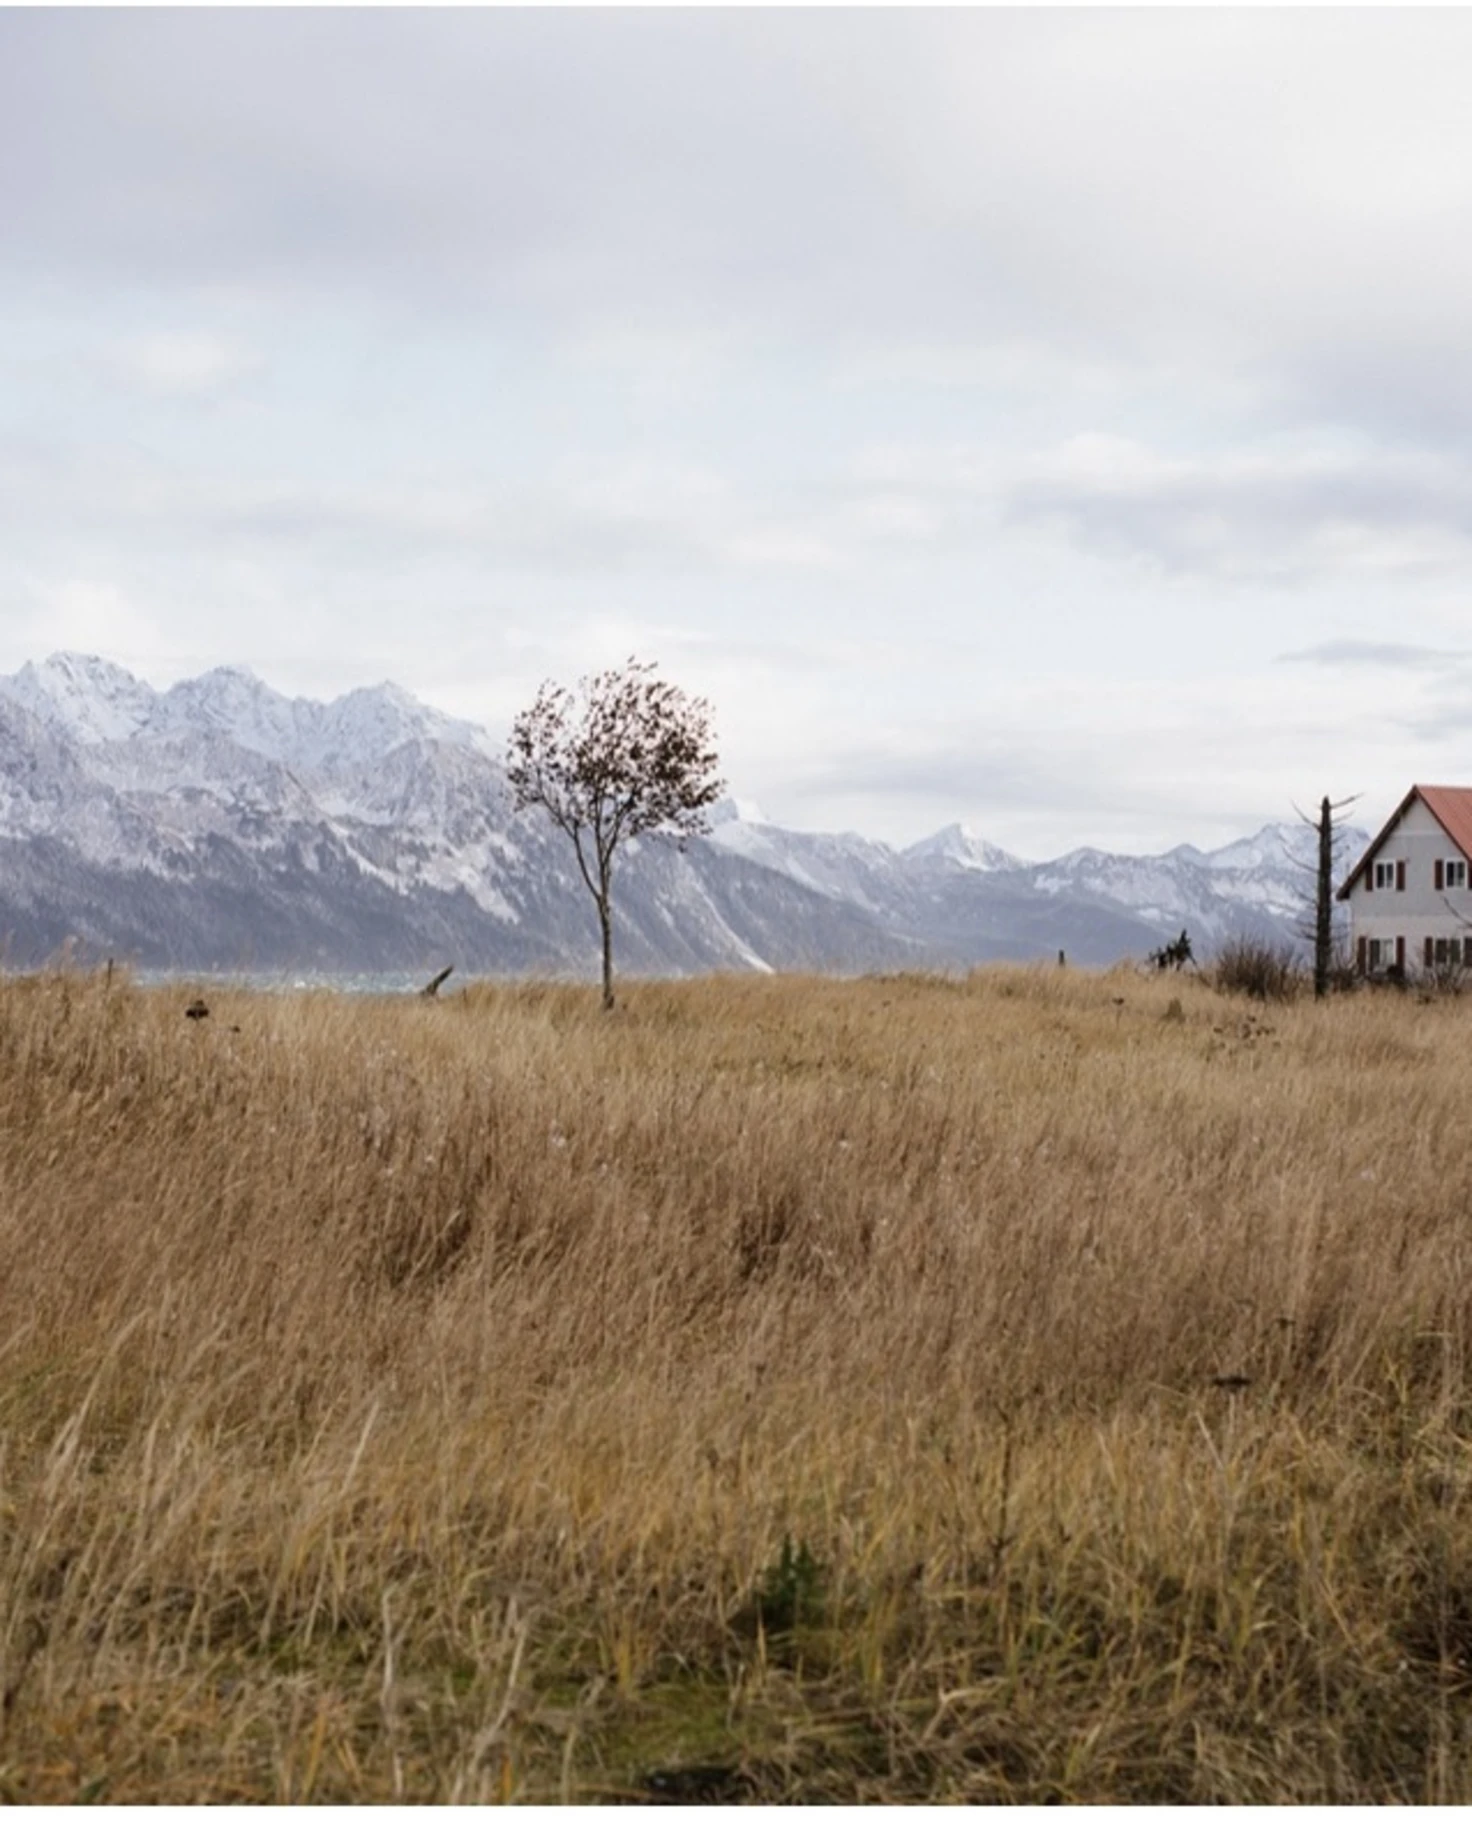 a solitary cabin on a grassy meadow in front of snowy peaks